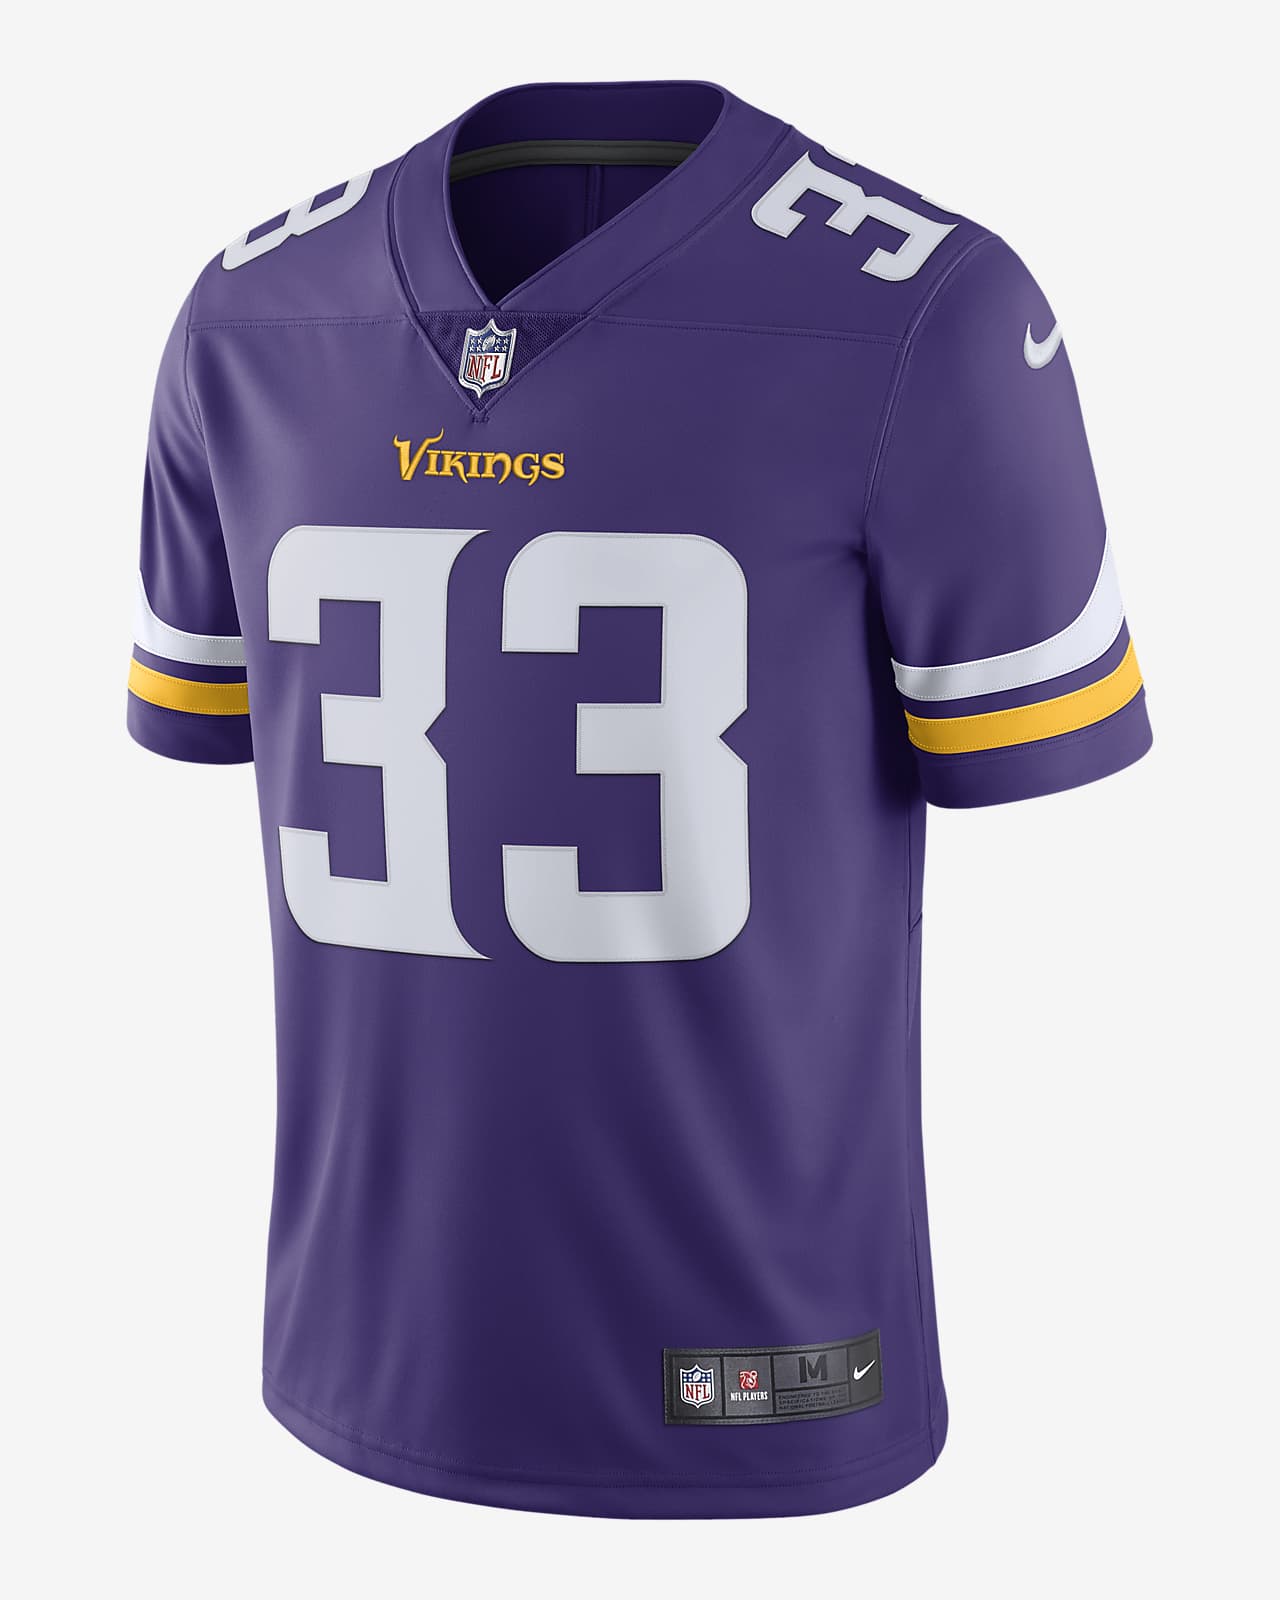 Outdoor American Football Jersey T-shirts Dalvin Minnesota NO.33 Purple，Cook Vikings Vapor Untouchable Limited Jersey Breathable Sports Short-Sleeved For Men 